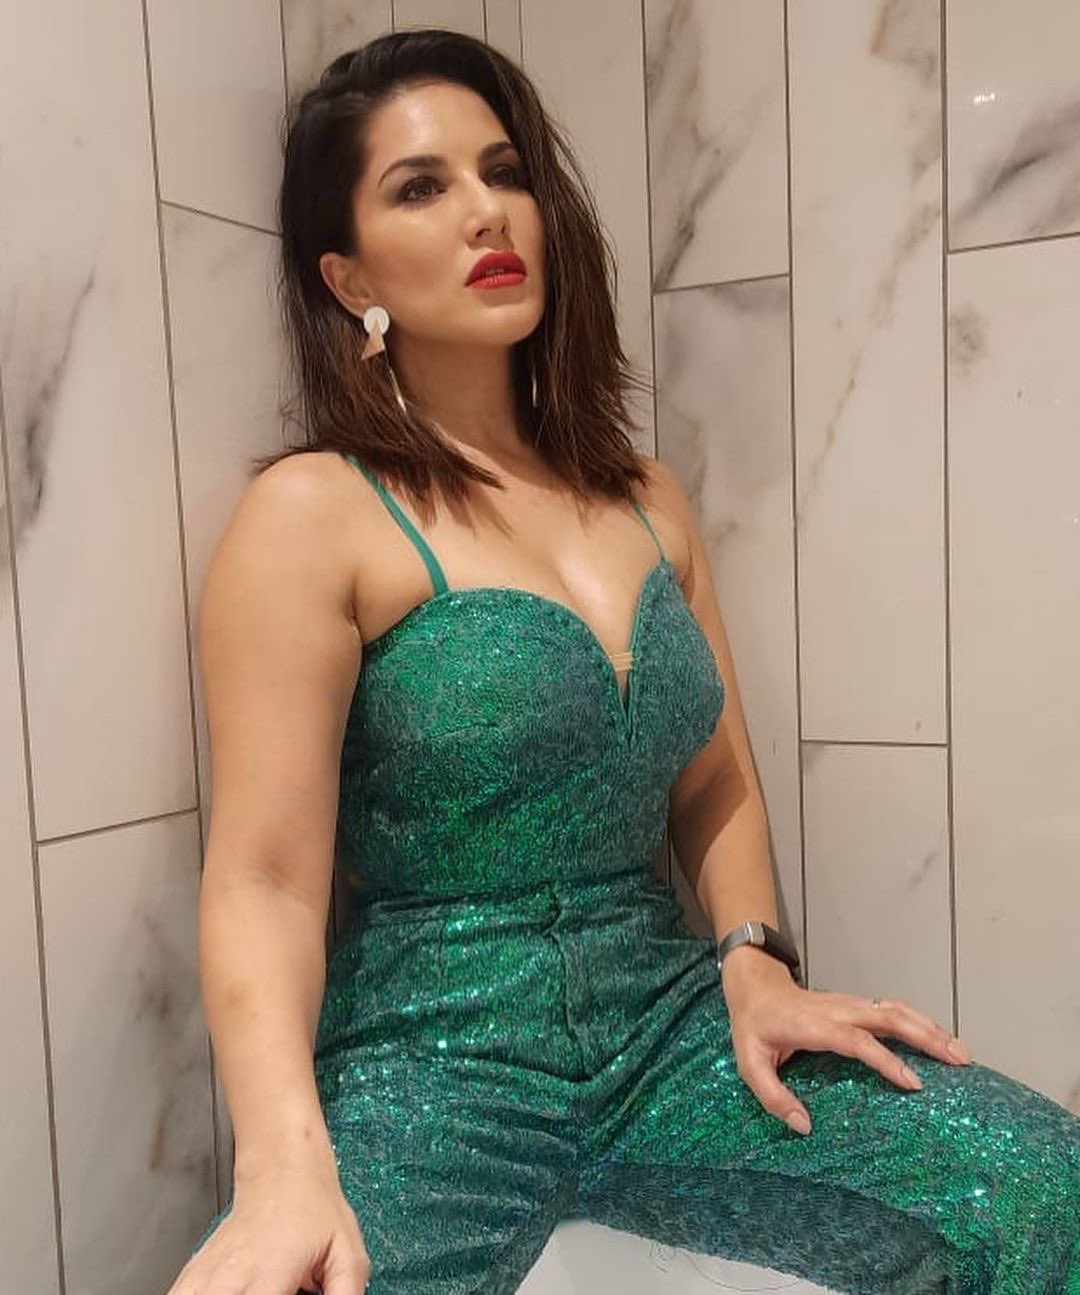 Kerala police questions actress Sunny Leone in alleged cheating case